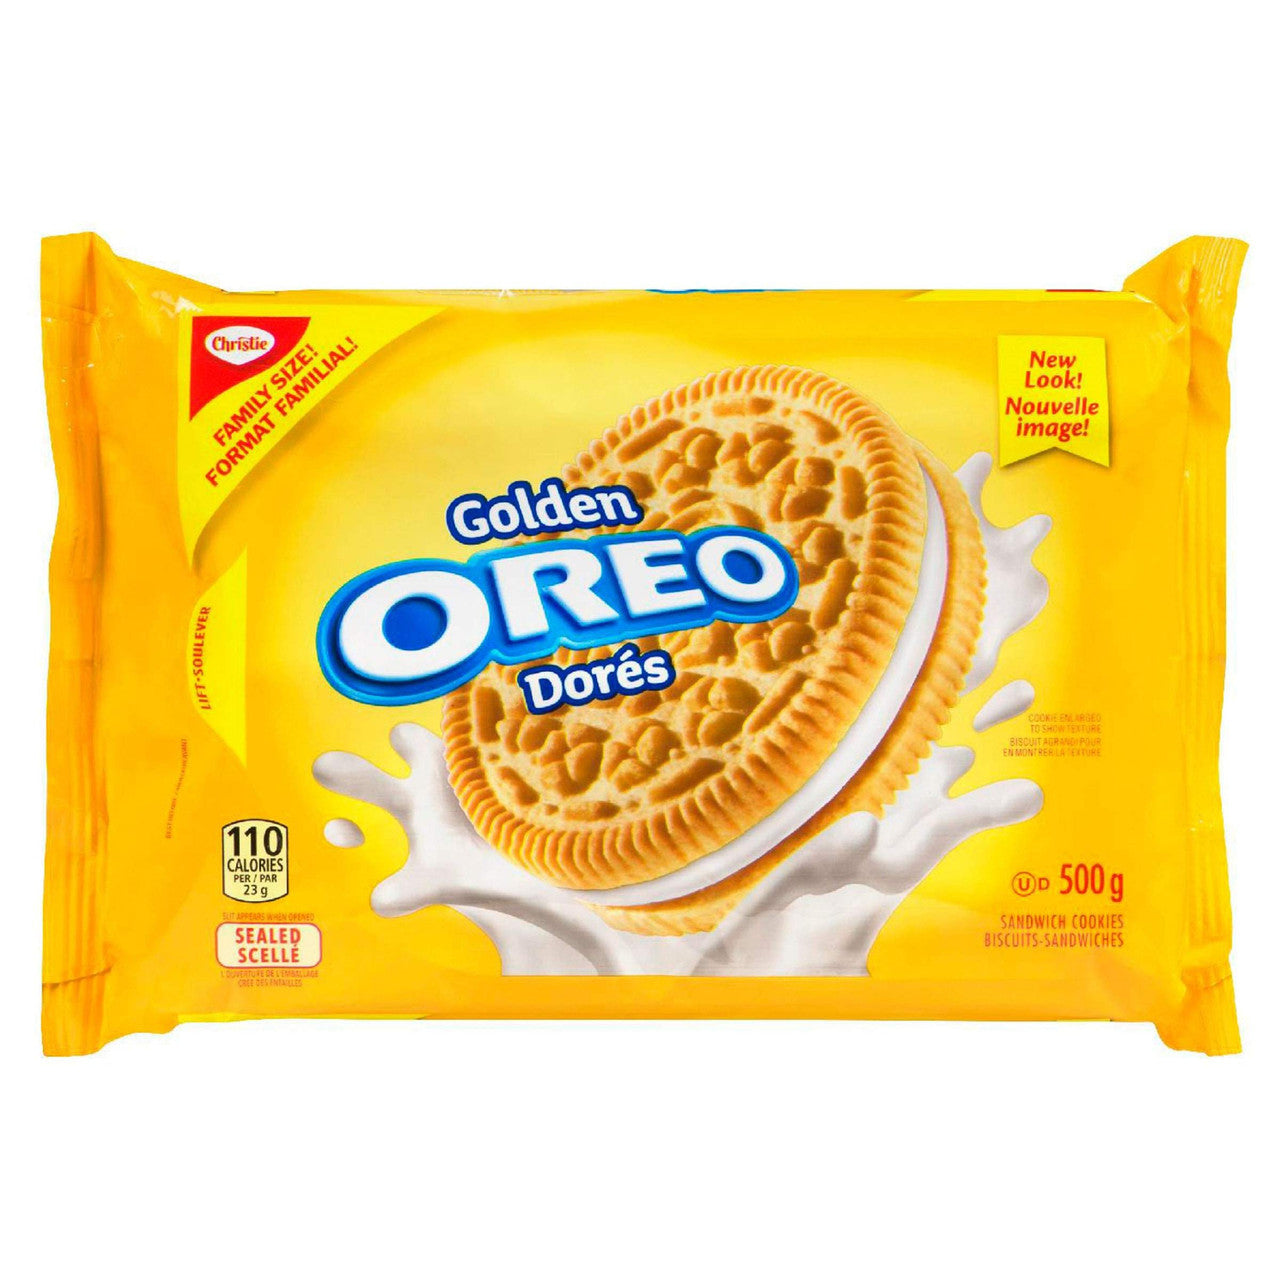 Christie Oreo Golden Cookies, 500g/17.6oz, (Imported from Canada)